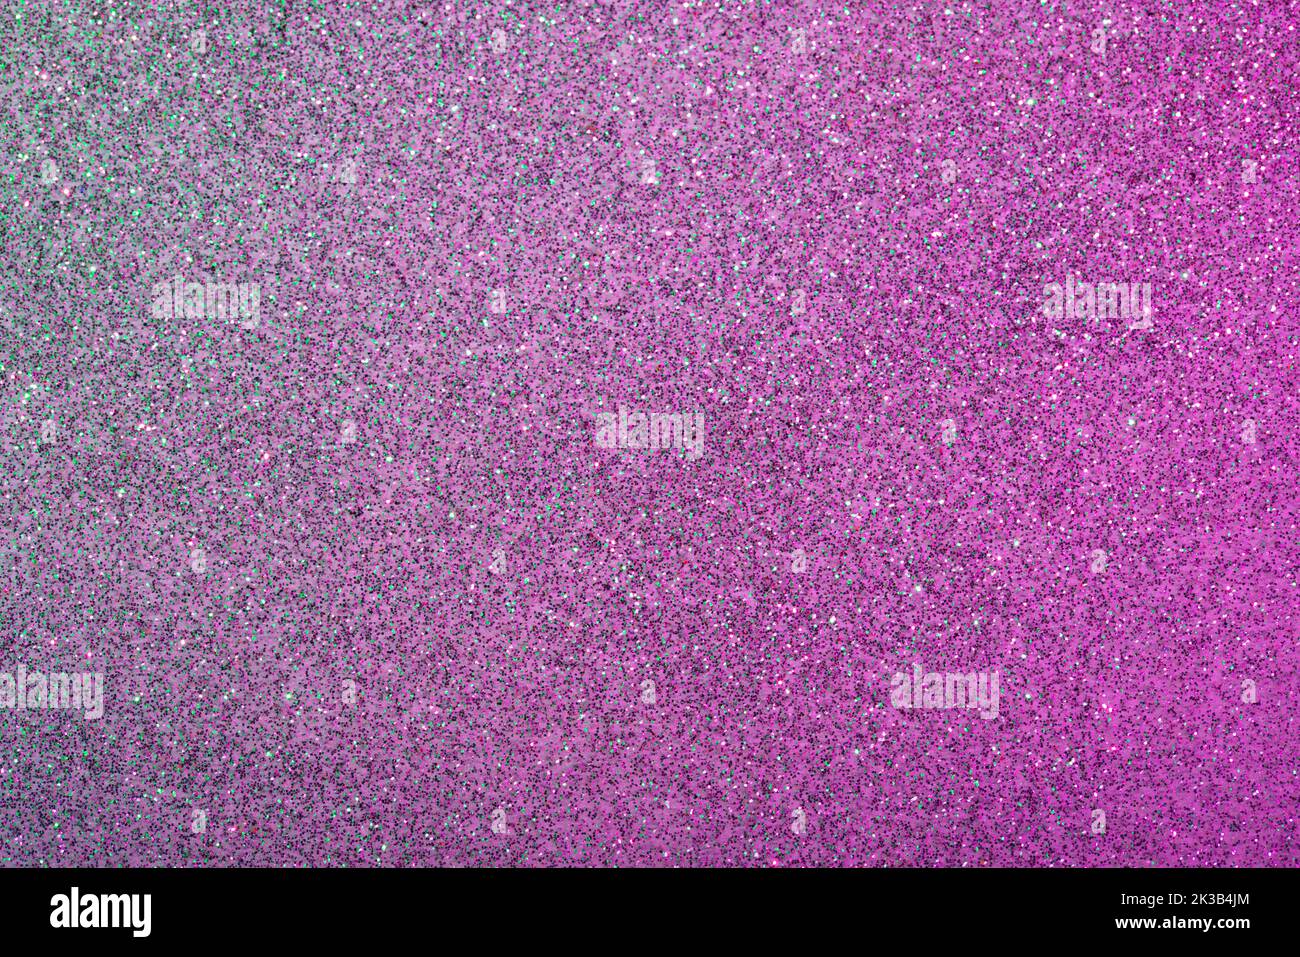 Abstract background with shiny glitter surface Stock Photo